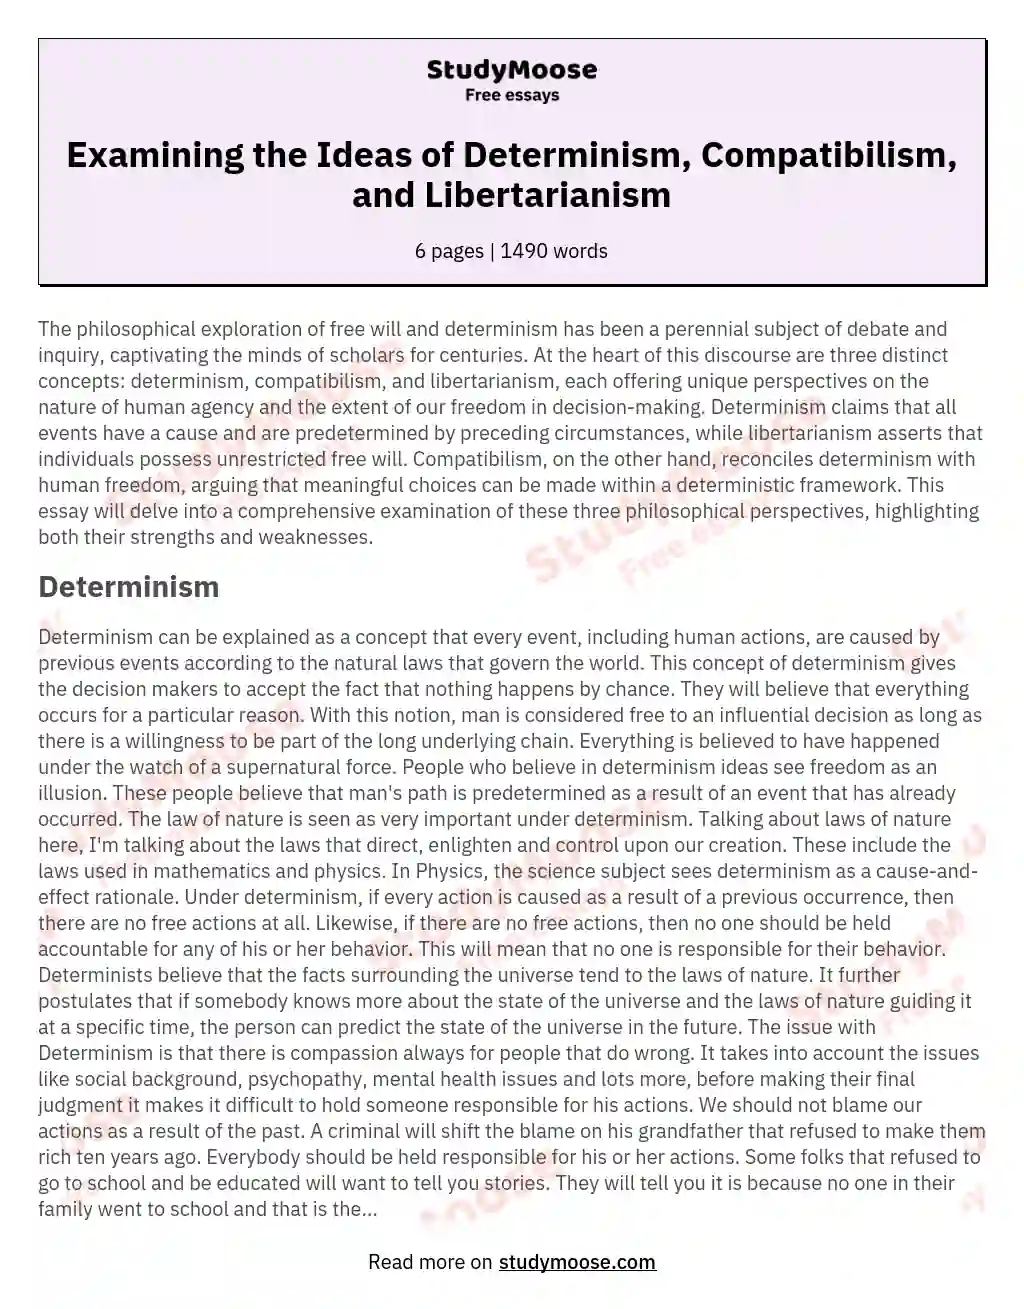 Examining the Ideas of Determinism, Compatibilism, and Libertarianism essay